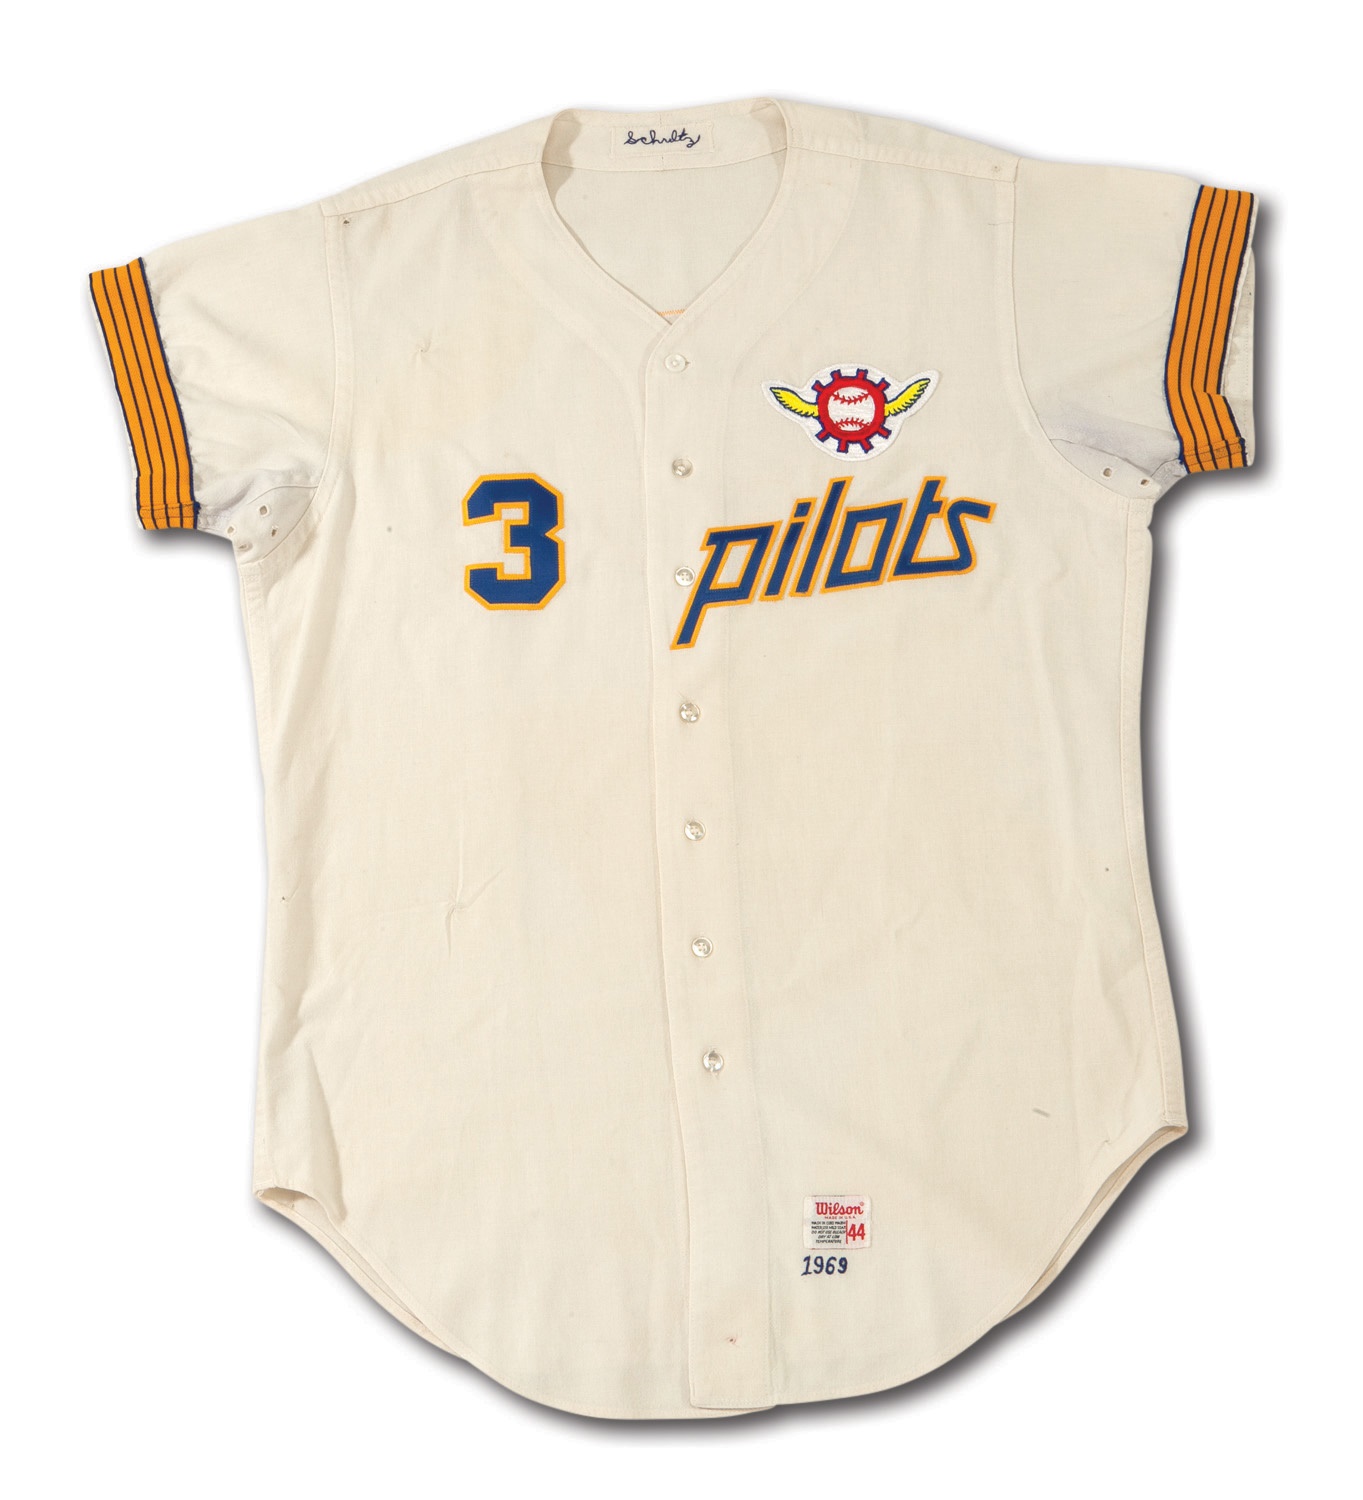 Seattle Pilots jerseys among the most coveted of the one-year